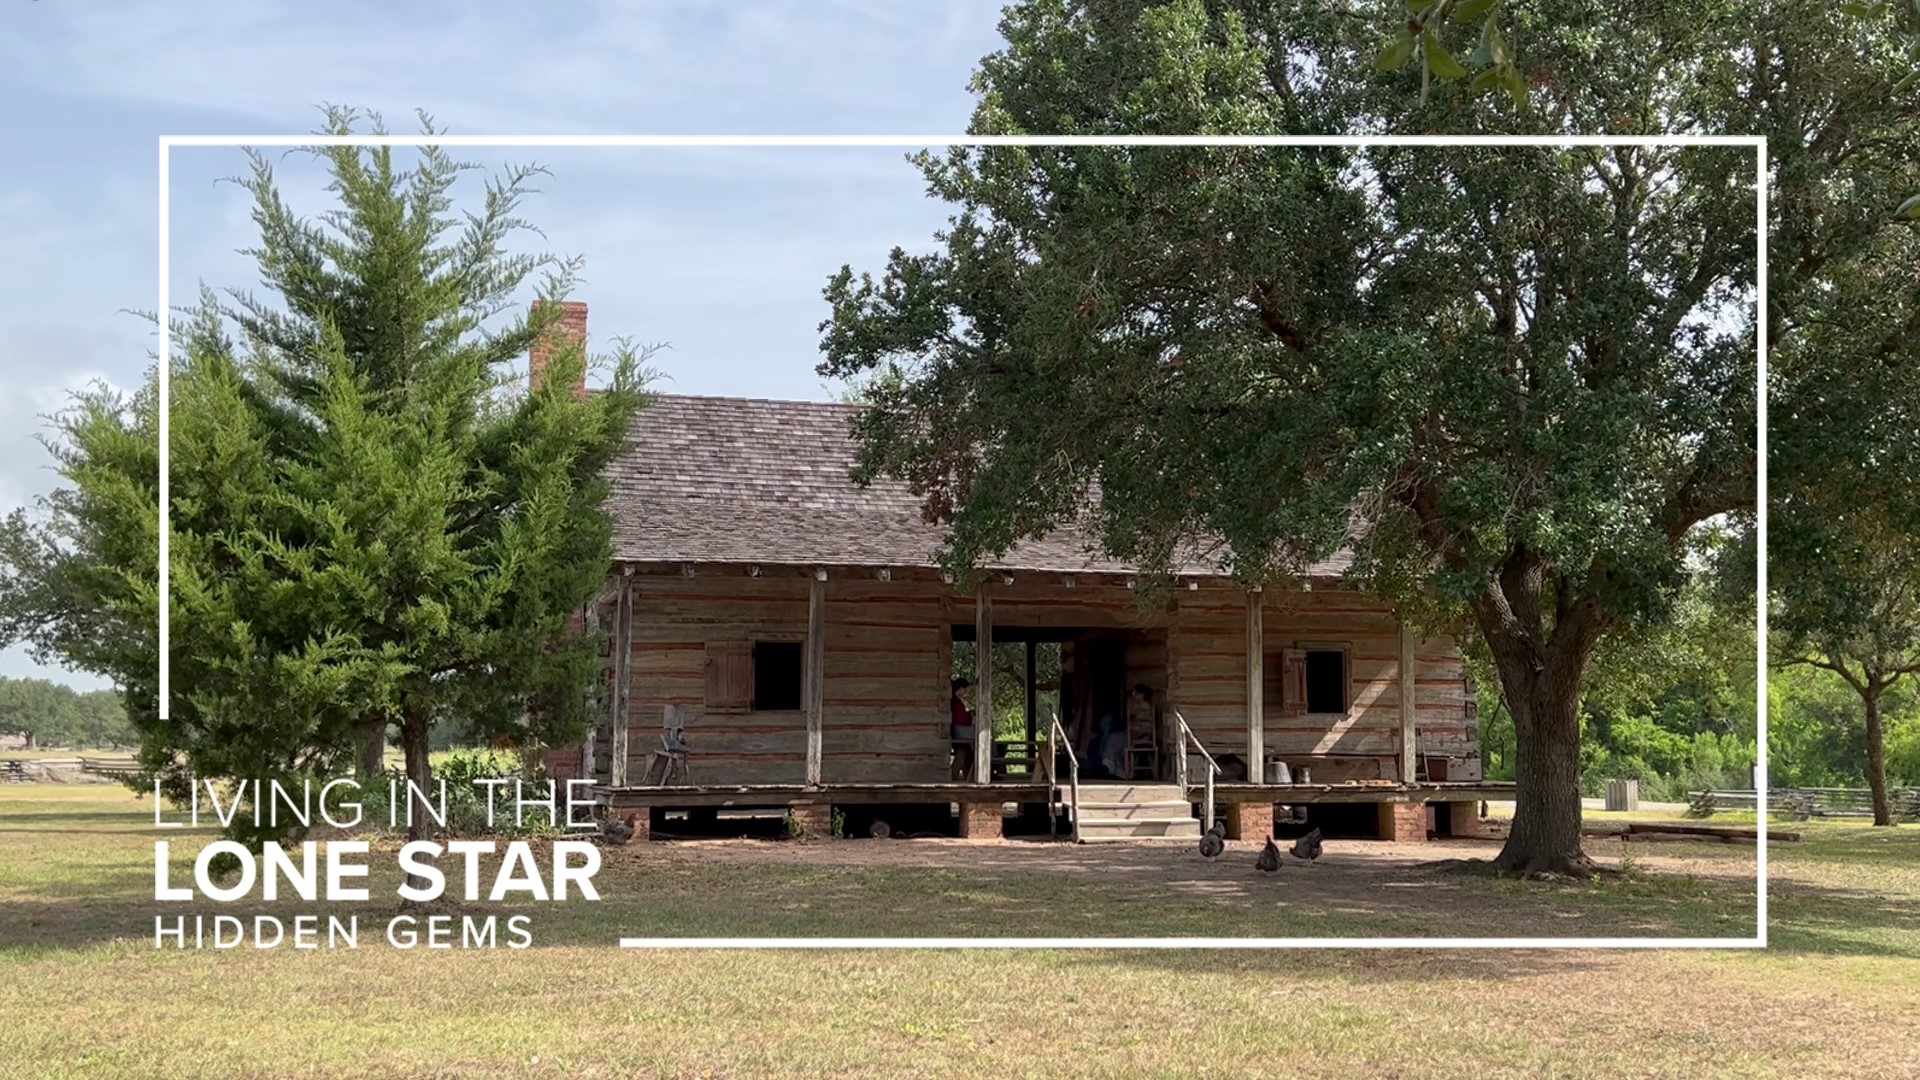 George Ranch Historical Park in Richmond uses four generations of one family to tell the story of Texas settlement over 100 years.